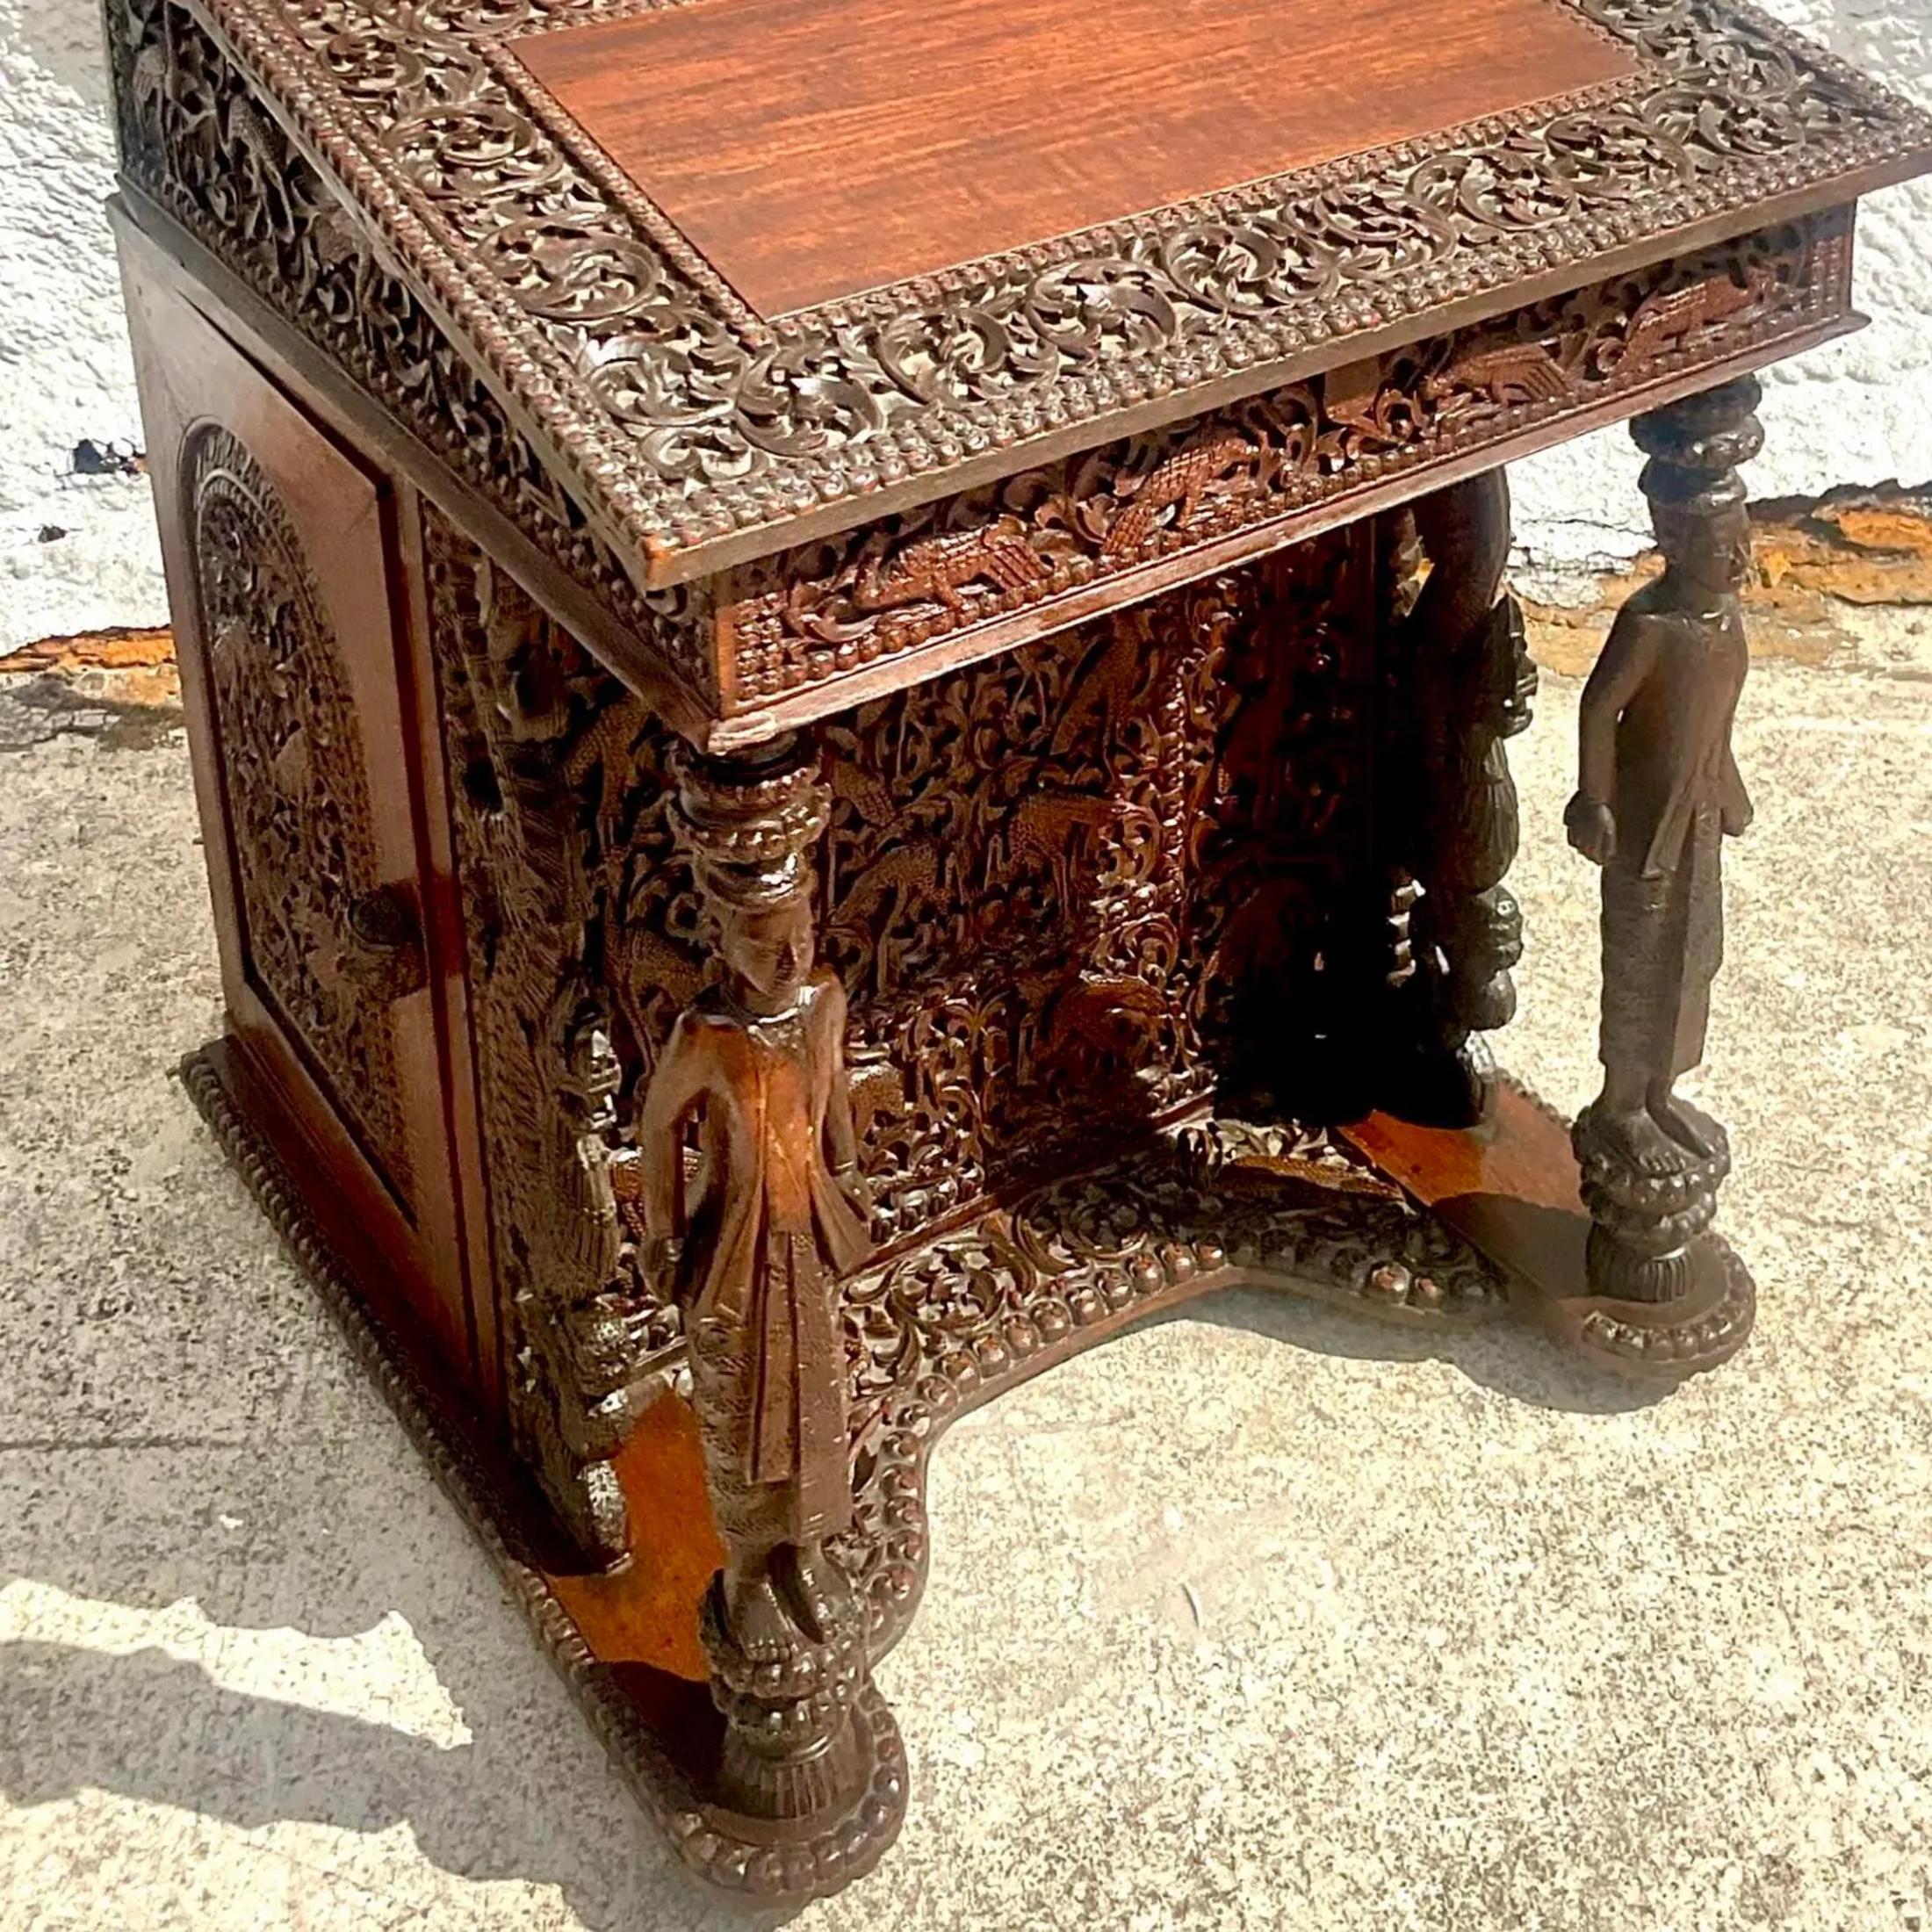 A vintage Boho hand carved desk. A beautiful Anglo Indian Davenport with incredible attention to detail. Lots of built in drawers and slots make this desk beautiful and functional. A real collectors item. Acquired from a Palm Beach estate